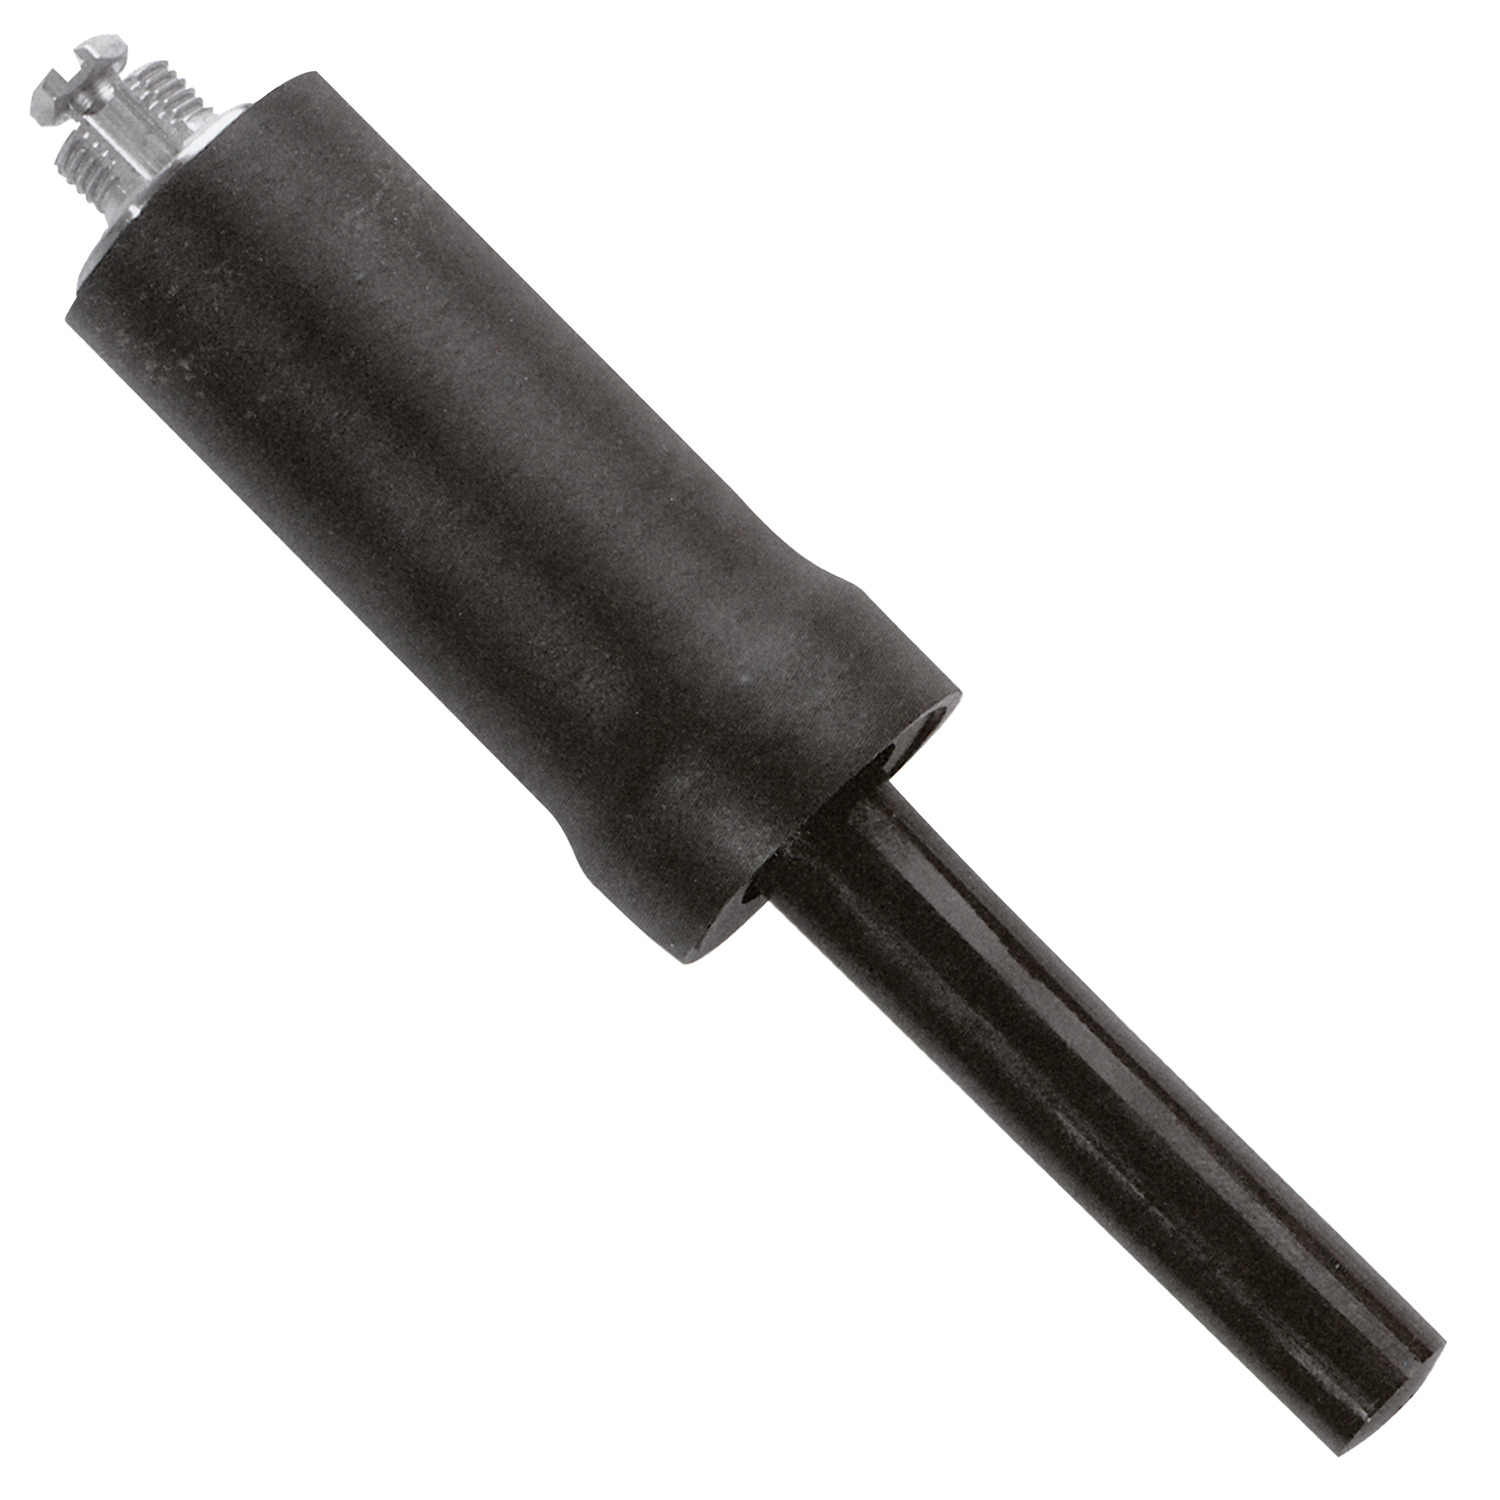 Product L4620, Shock Absorber 0.627" bore / 